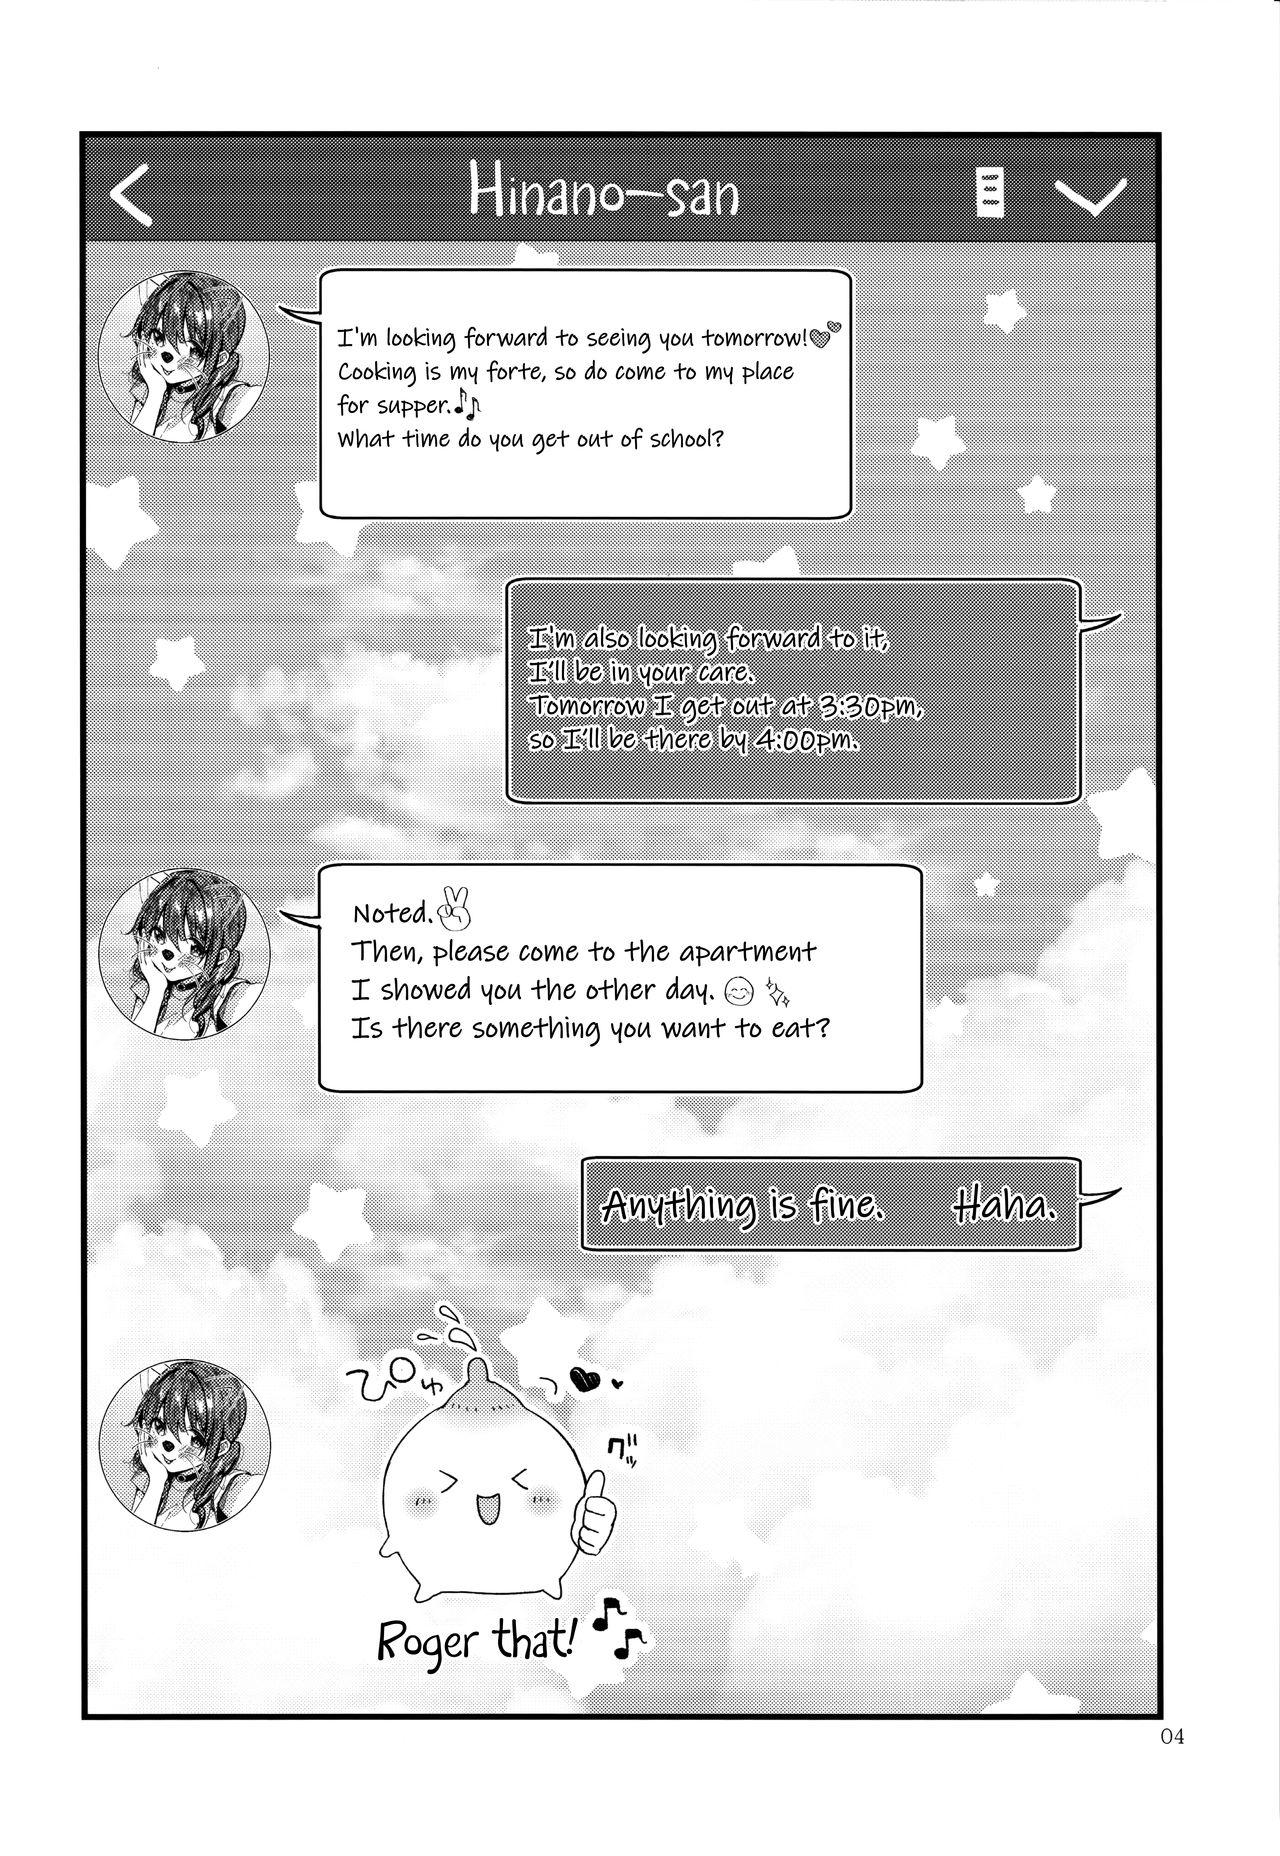 Bwc Onekatsu no Susume | The Big Sister Experience Recommendation - Original Glory Hole - Page 4